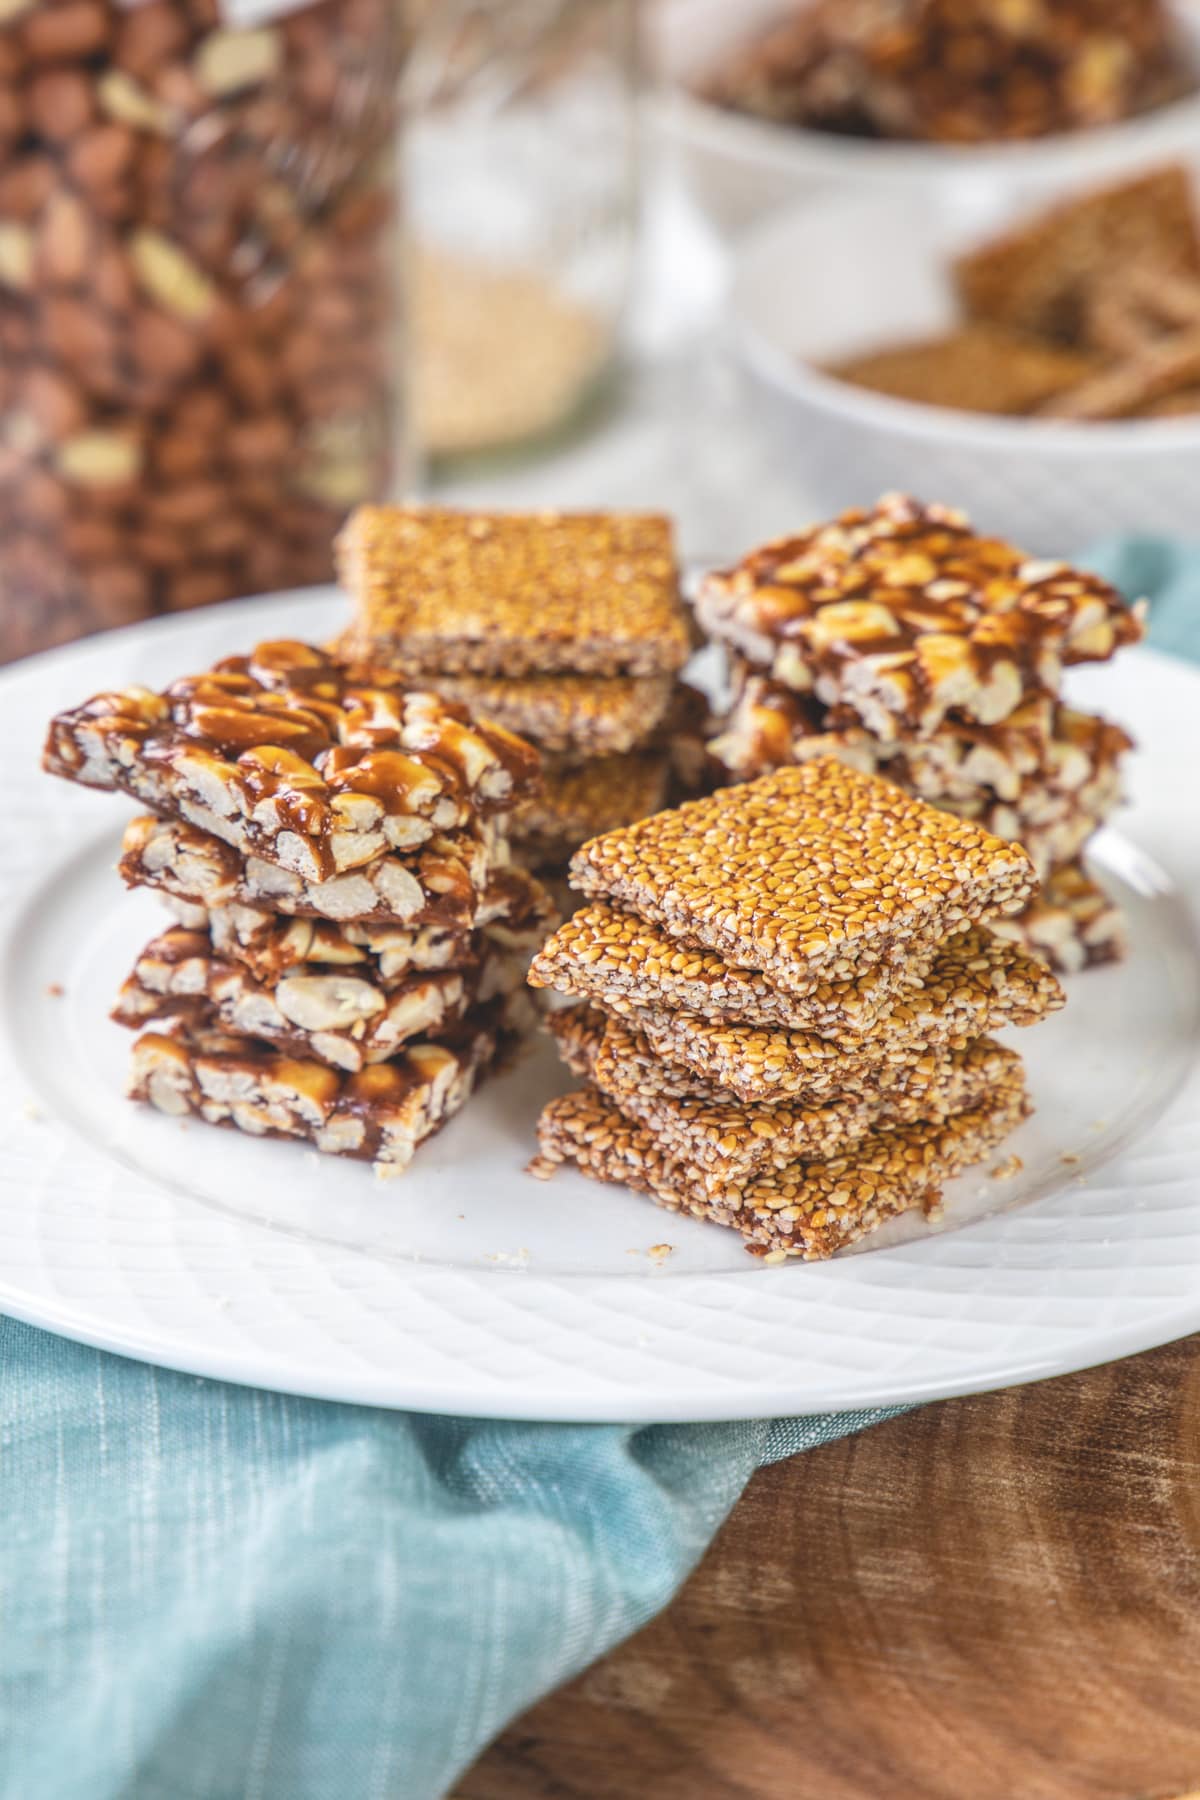 4 stacks of til chikki and peanut chikki in a plate